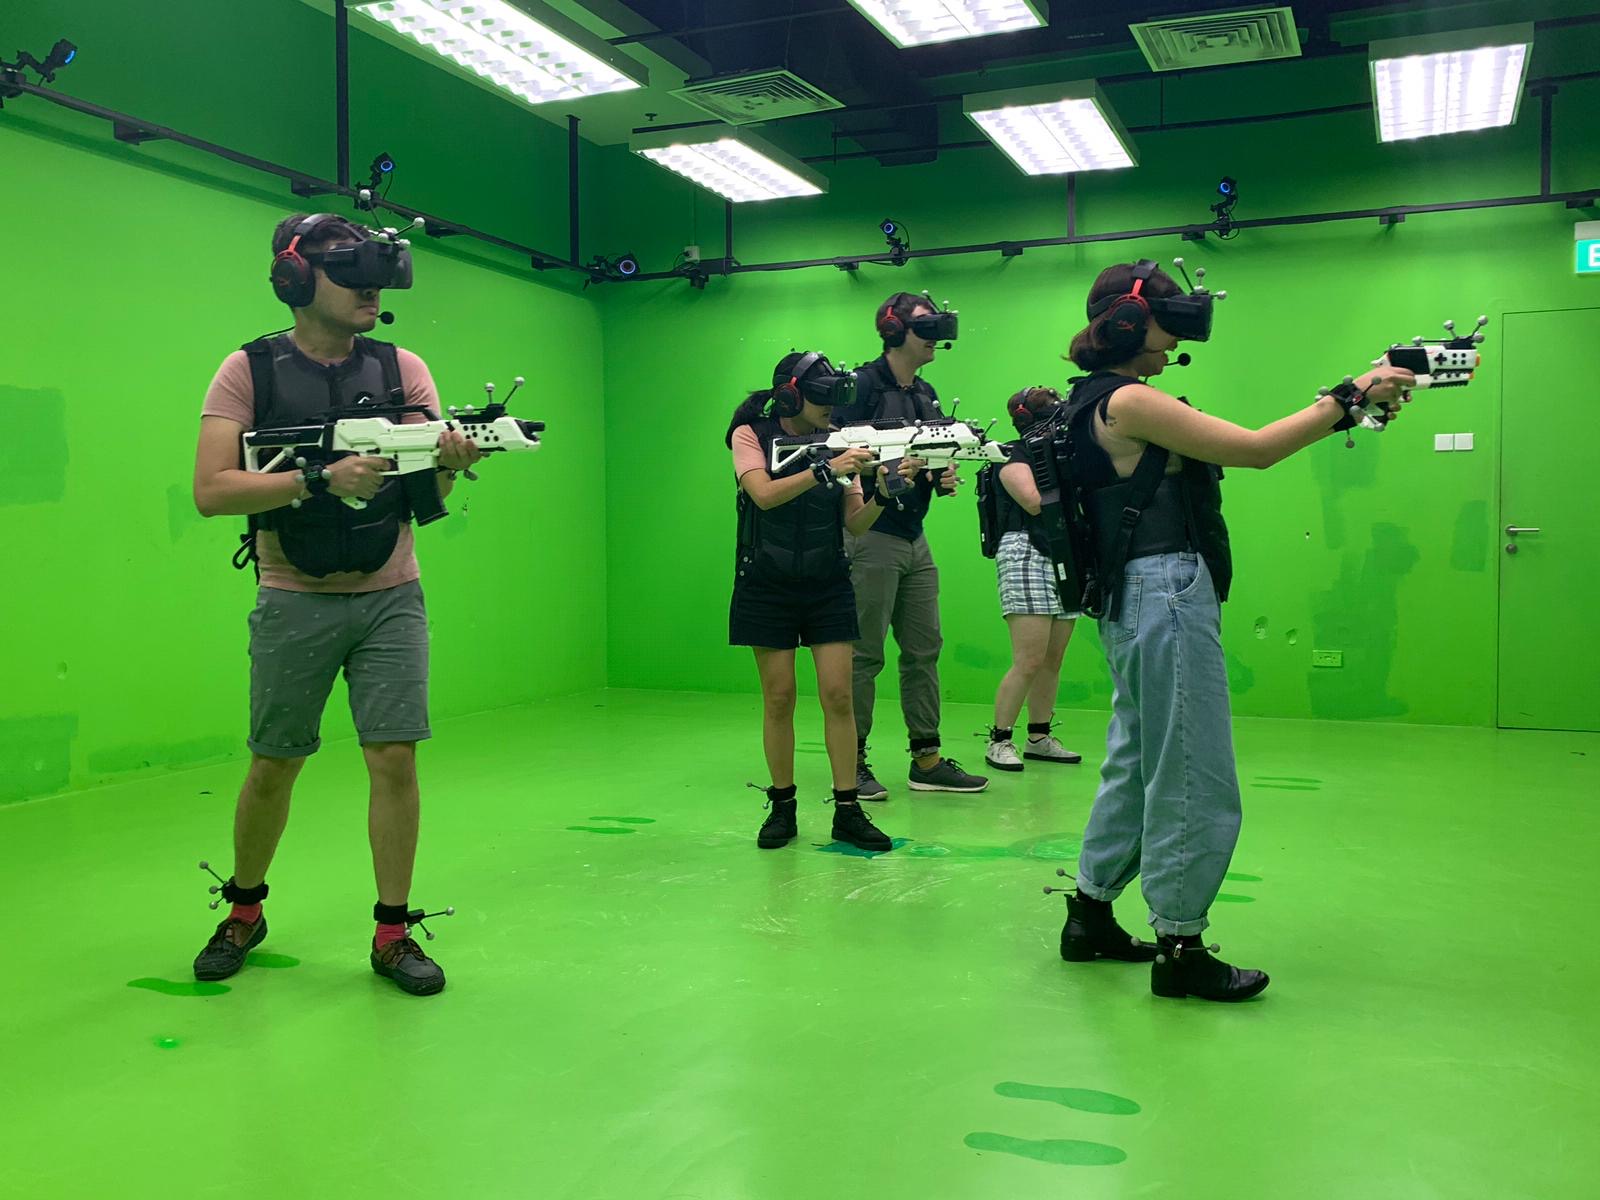 Photo of me playing a virtual reality shooting game with friends